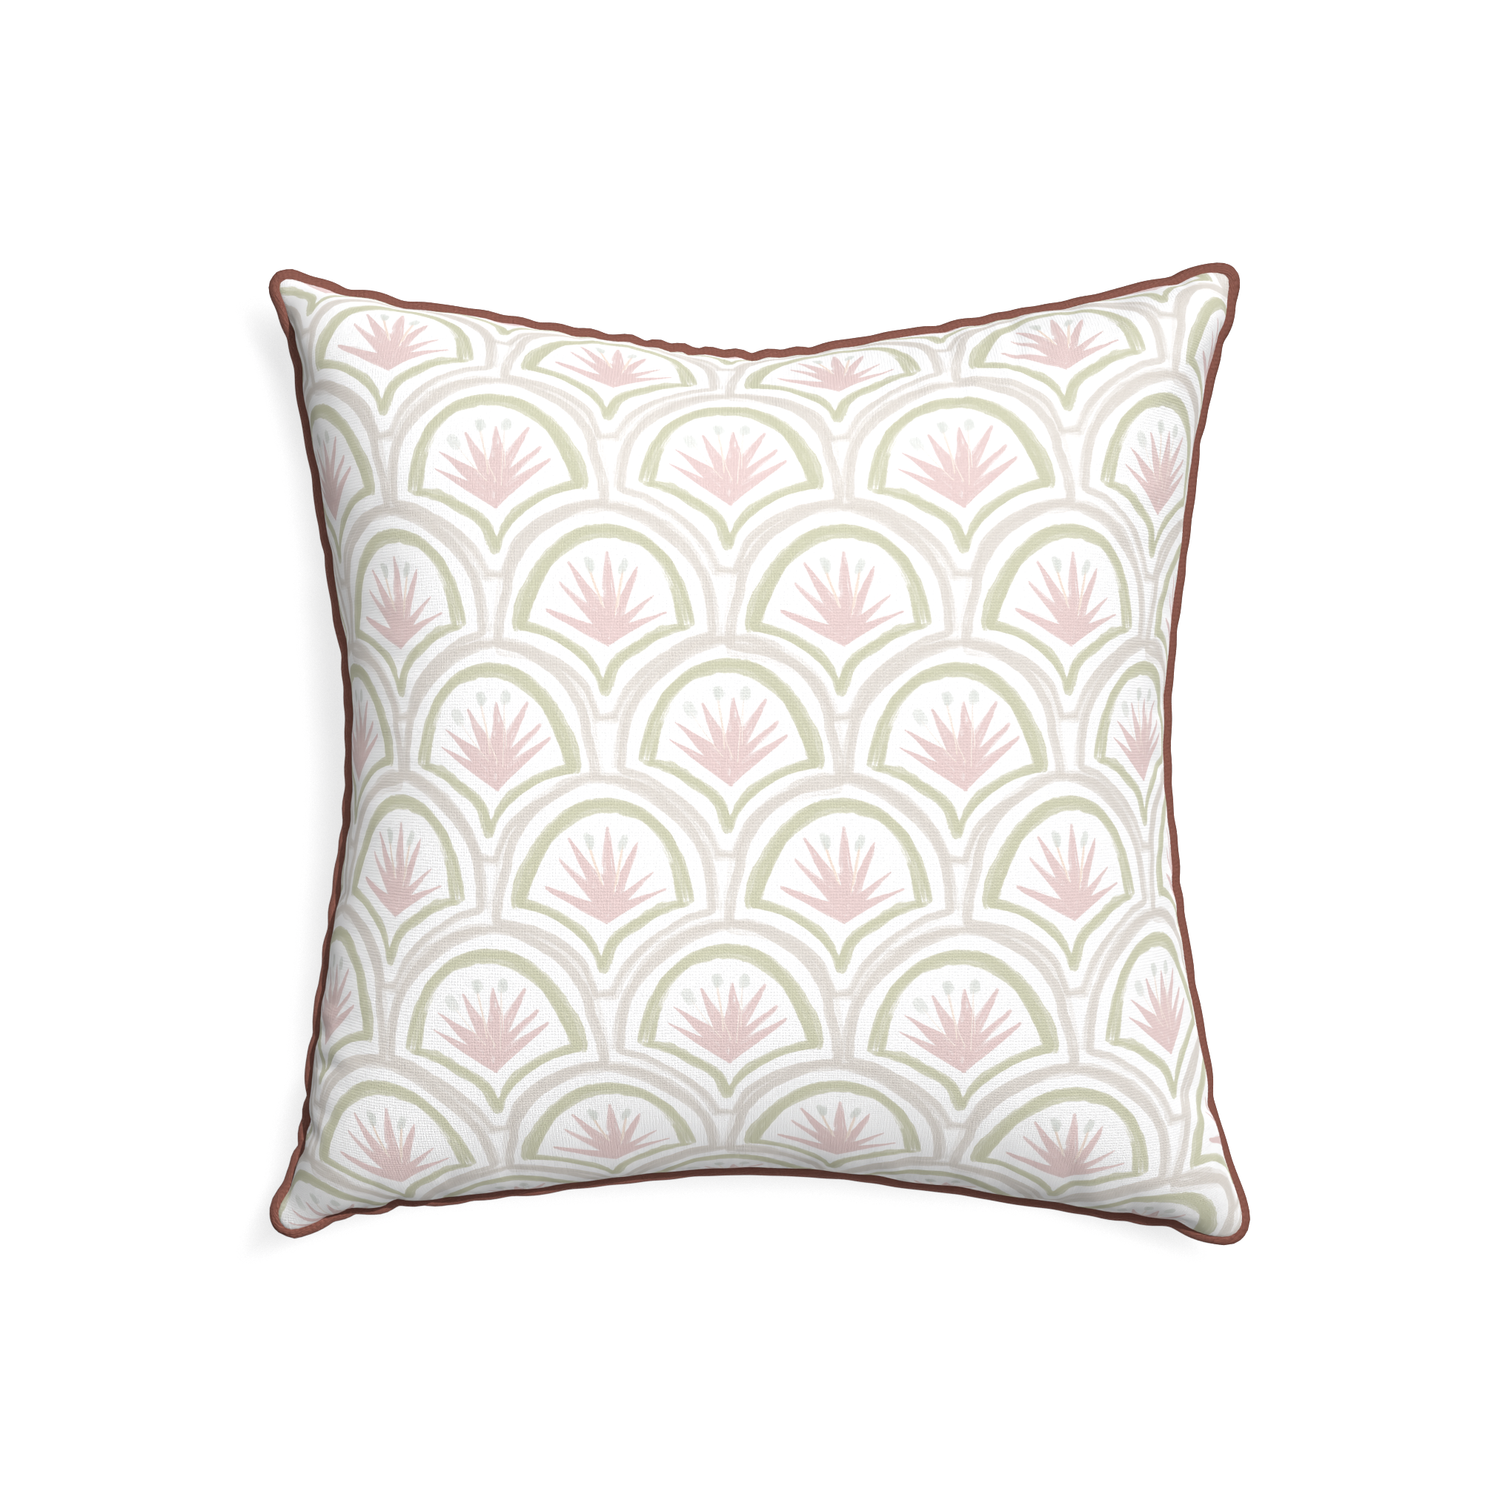 22-square thatcher rose custom pillow with w piping on white background